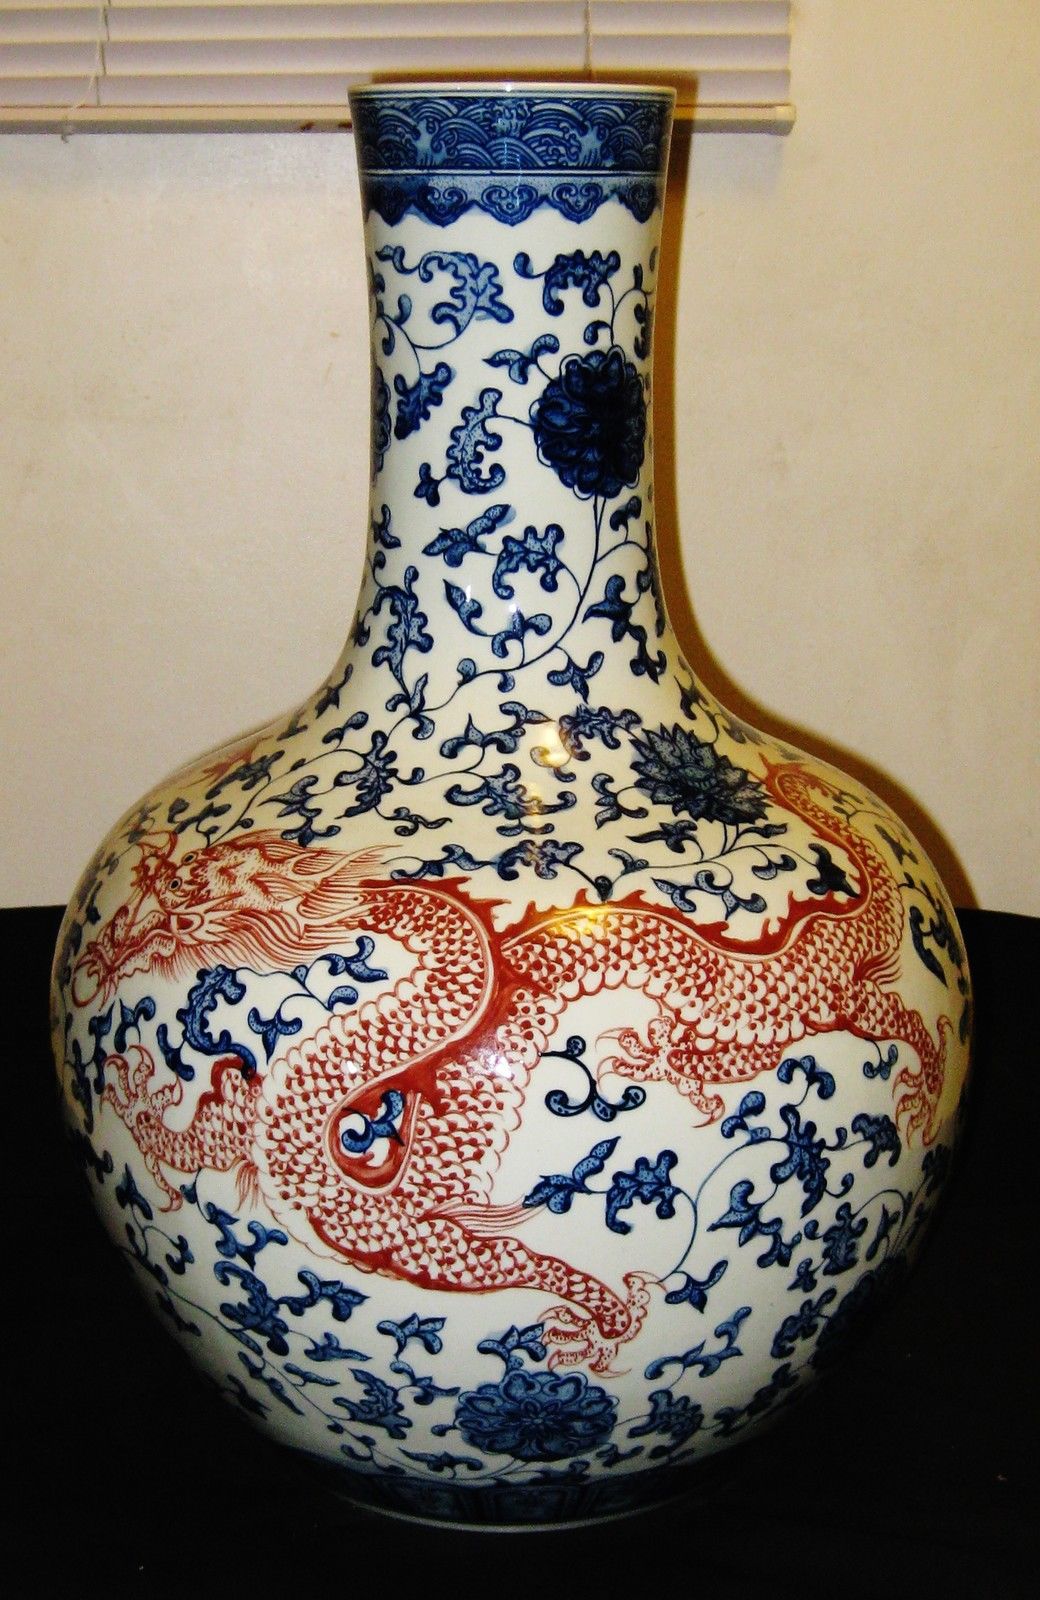 HUGE ANTIQUE CHINESE PORCELAIN DOUBLE DRAGONS FIVE- CLAWS VASE, 19TH CENTURY